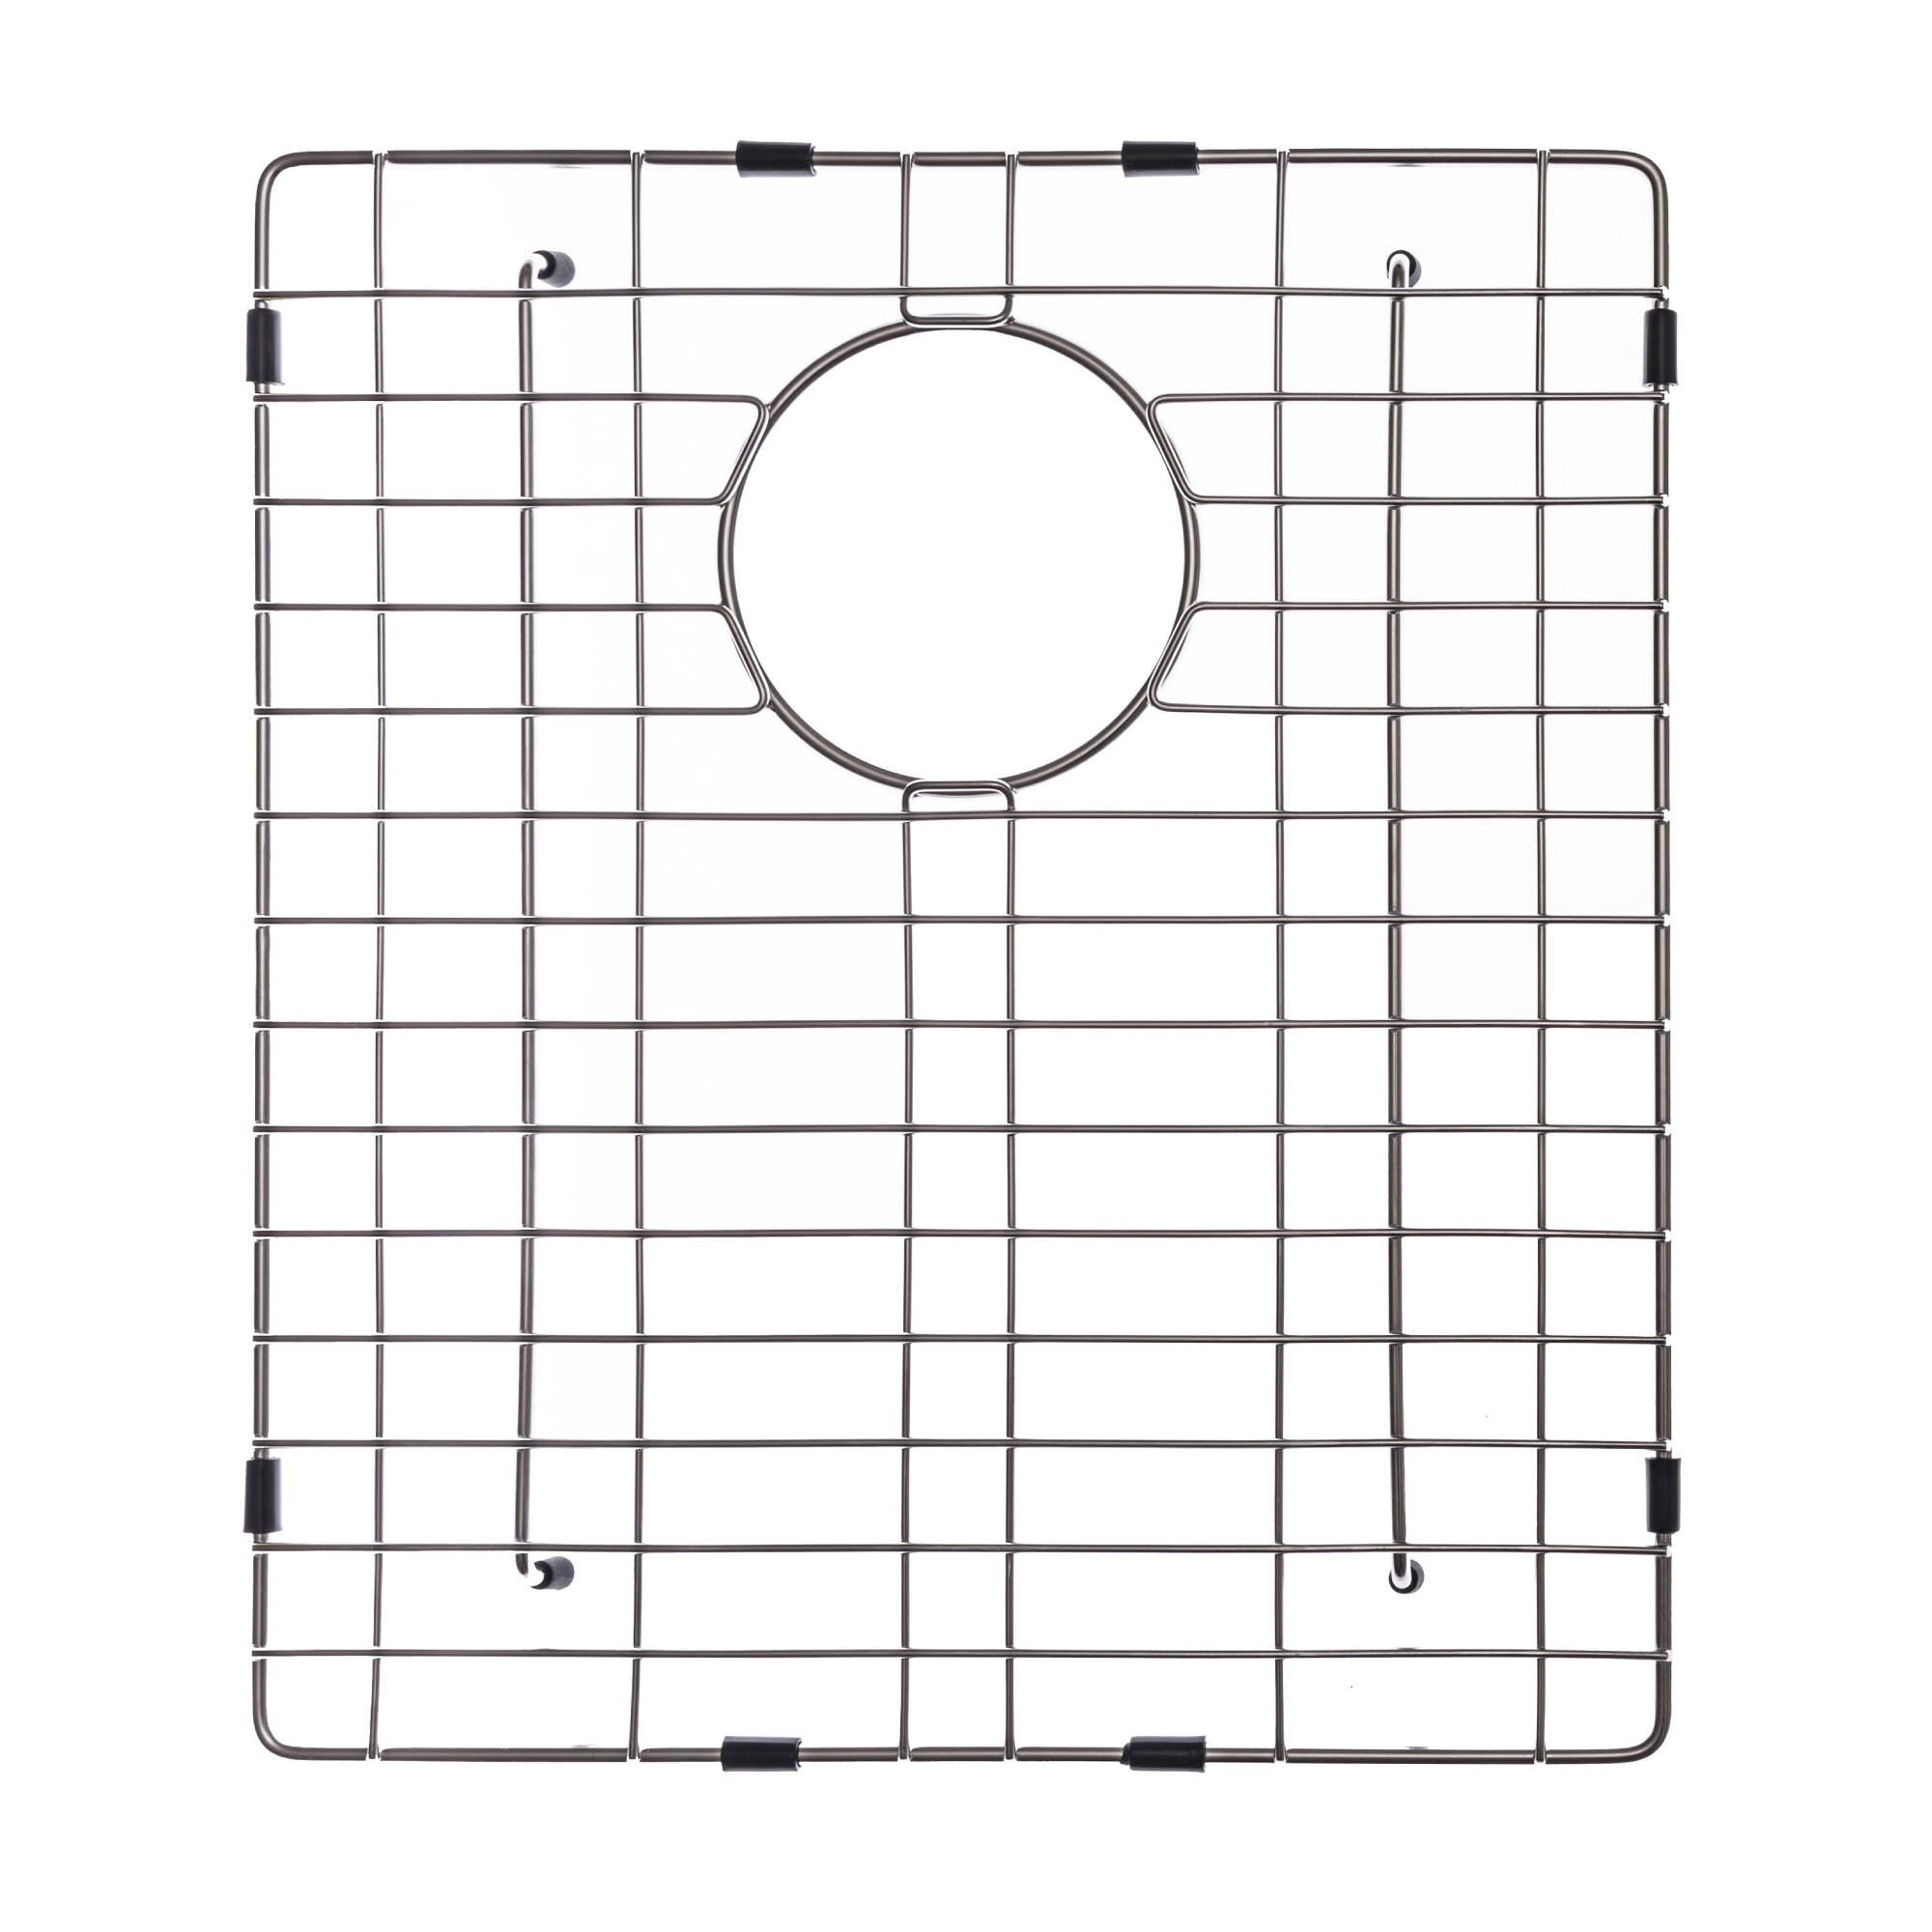 KRAUS KBG-102-33 Stainless Steel Bottom Grid for KHU102-33 Double Bowl 33? Kitchen Sink, 14 1/2? x 16 1/2? x 1 3/8? - image 1 of 2